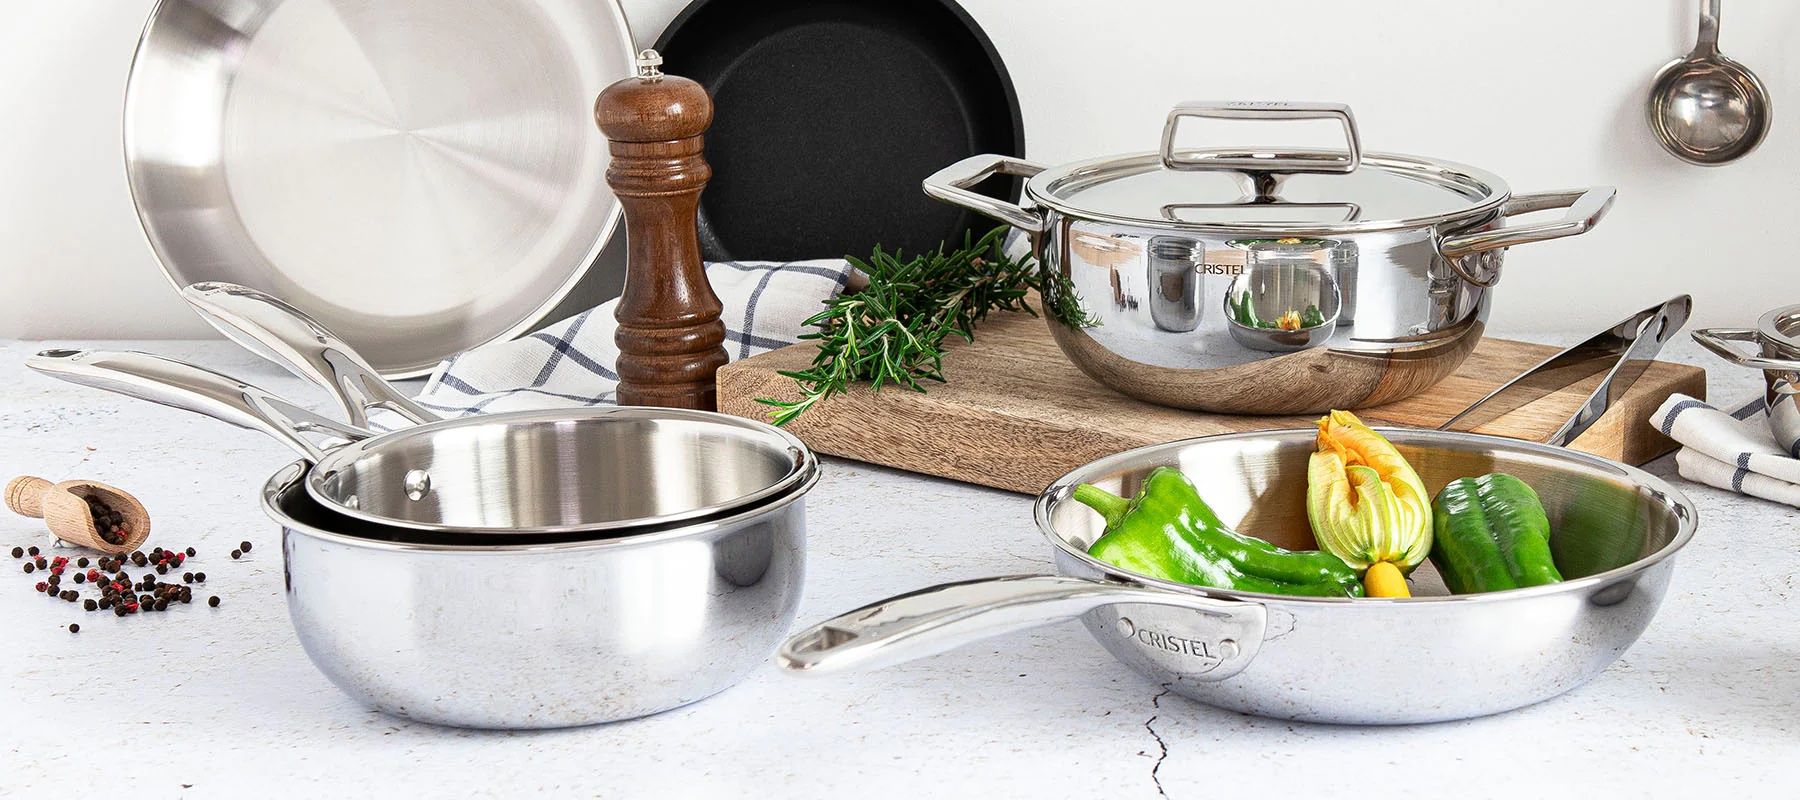 A tabletop display of several high-end stainless steel pots and pans